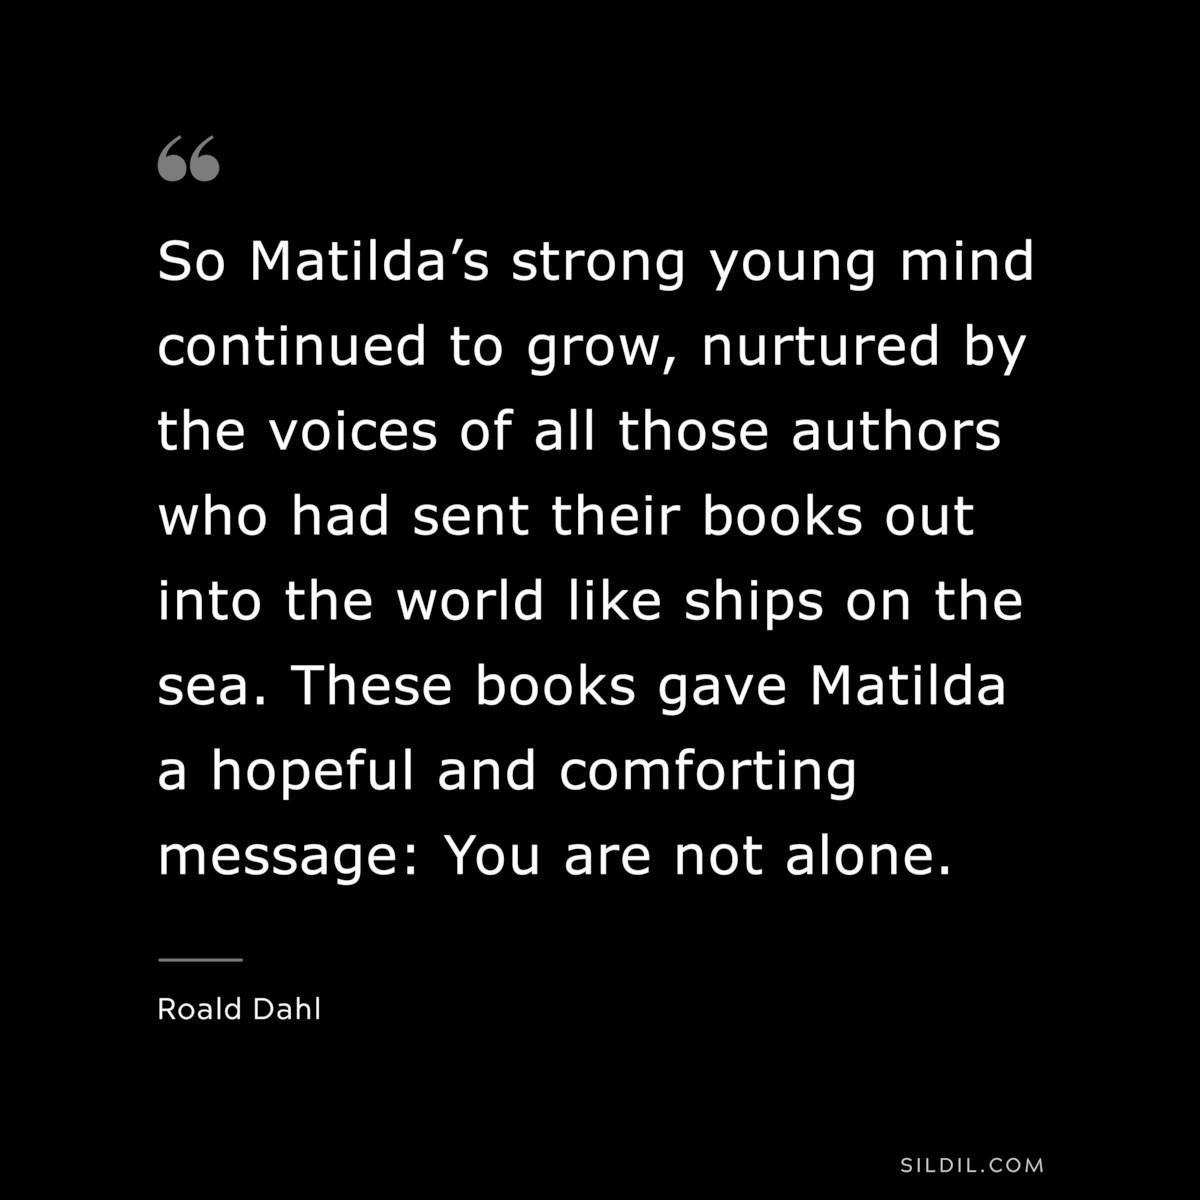 So Matilda’s strong young mind continued to grow, nurtured by the voices of all those authors who had sent their books out into the world like ships on the sea. These books gave Matilda a hopeful and comforting message: You are not alone. ― Roald Dahl